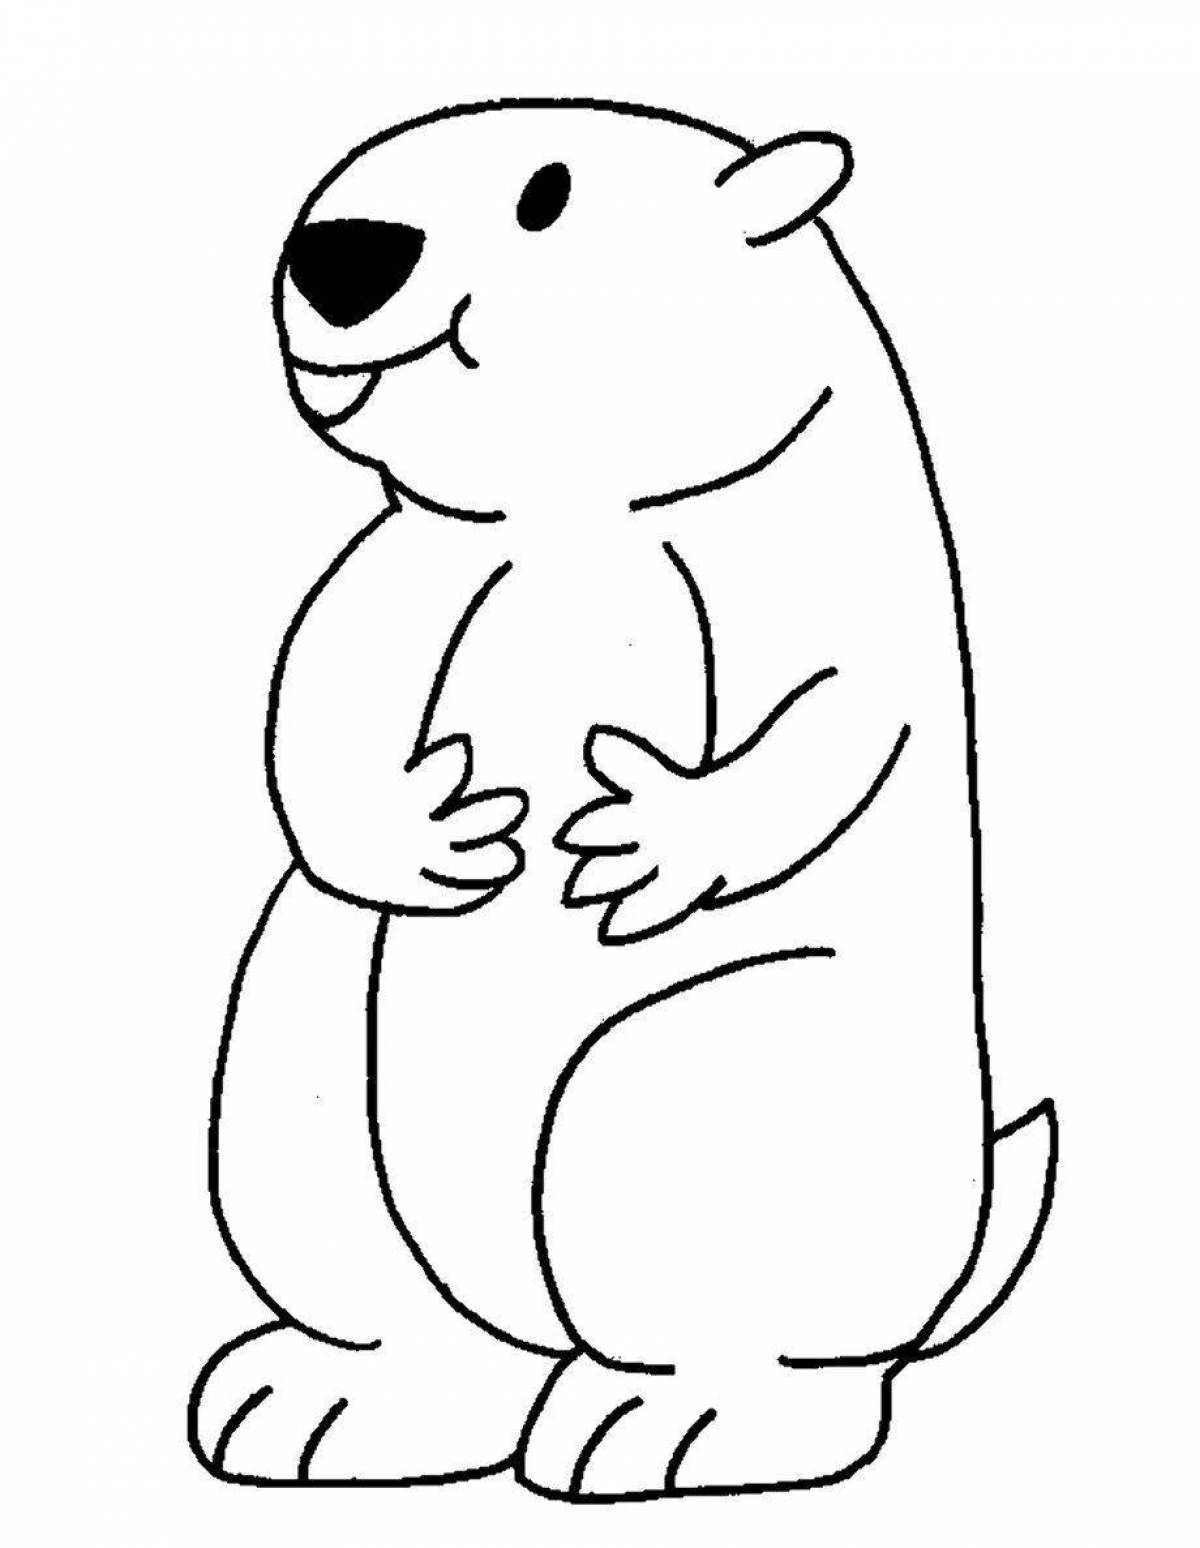 Glorious marmot coloring page